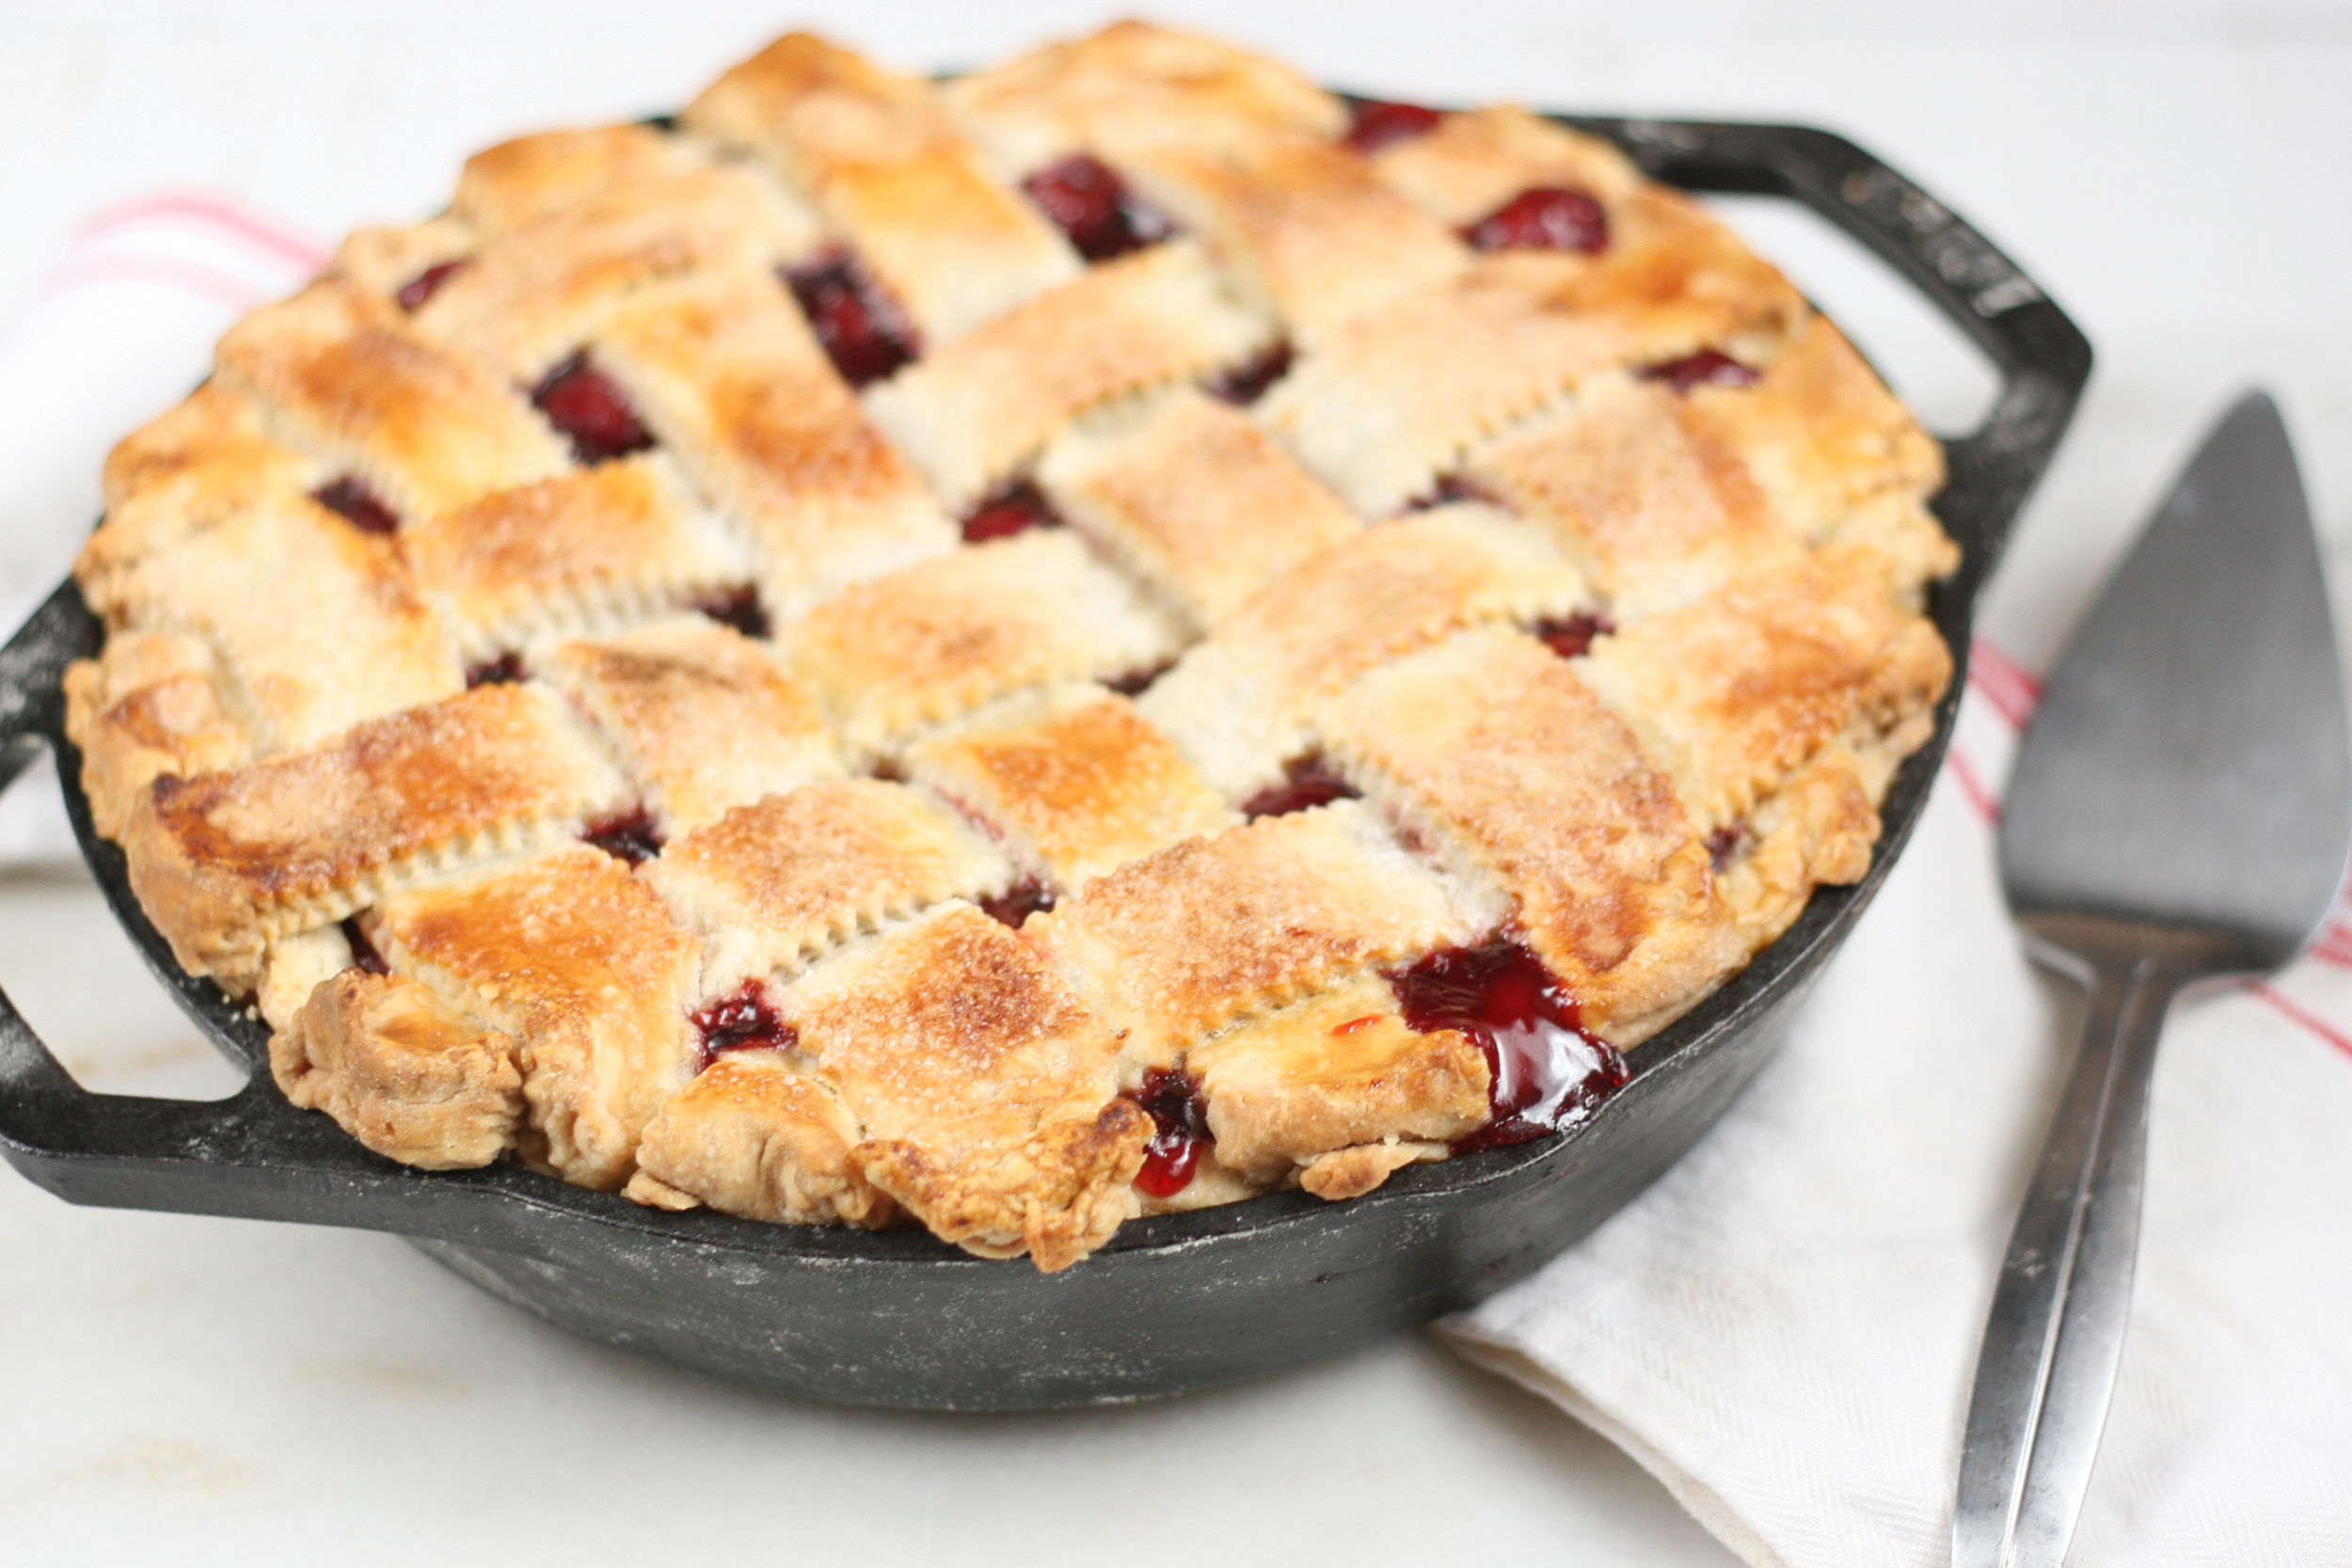 homemade cherry pie with lattice crust in a 2-handle cast iron skillet.